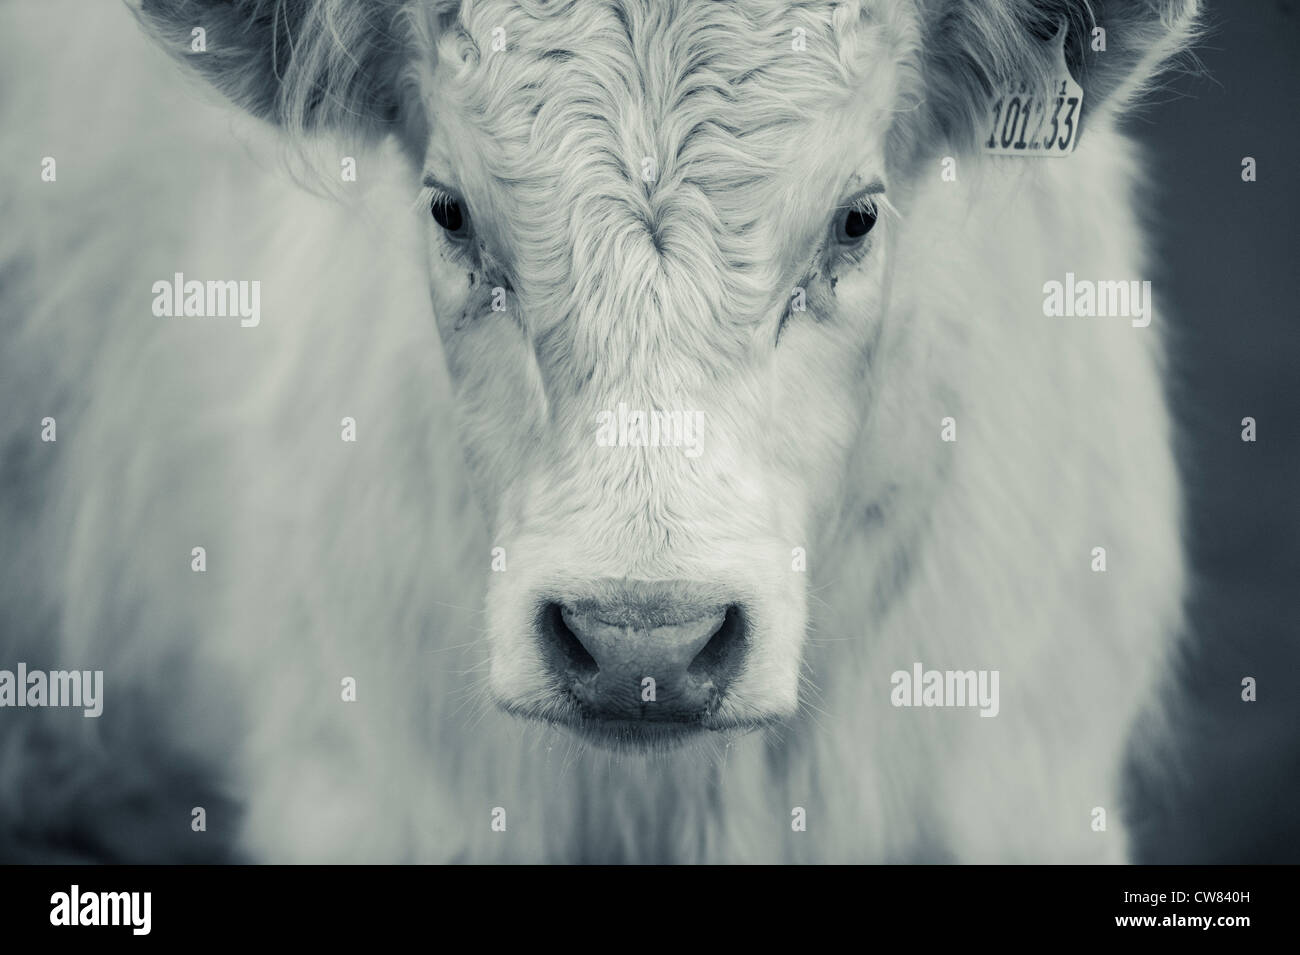 A Cow gives me a long stare. Stock Photo